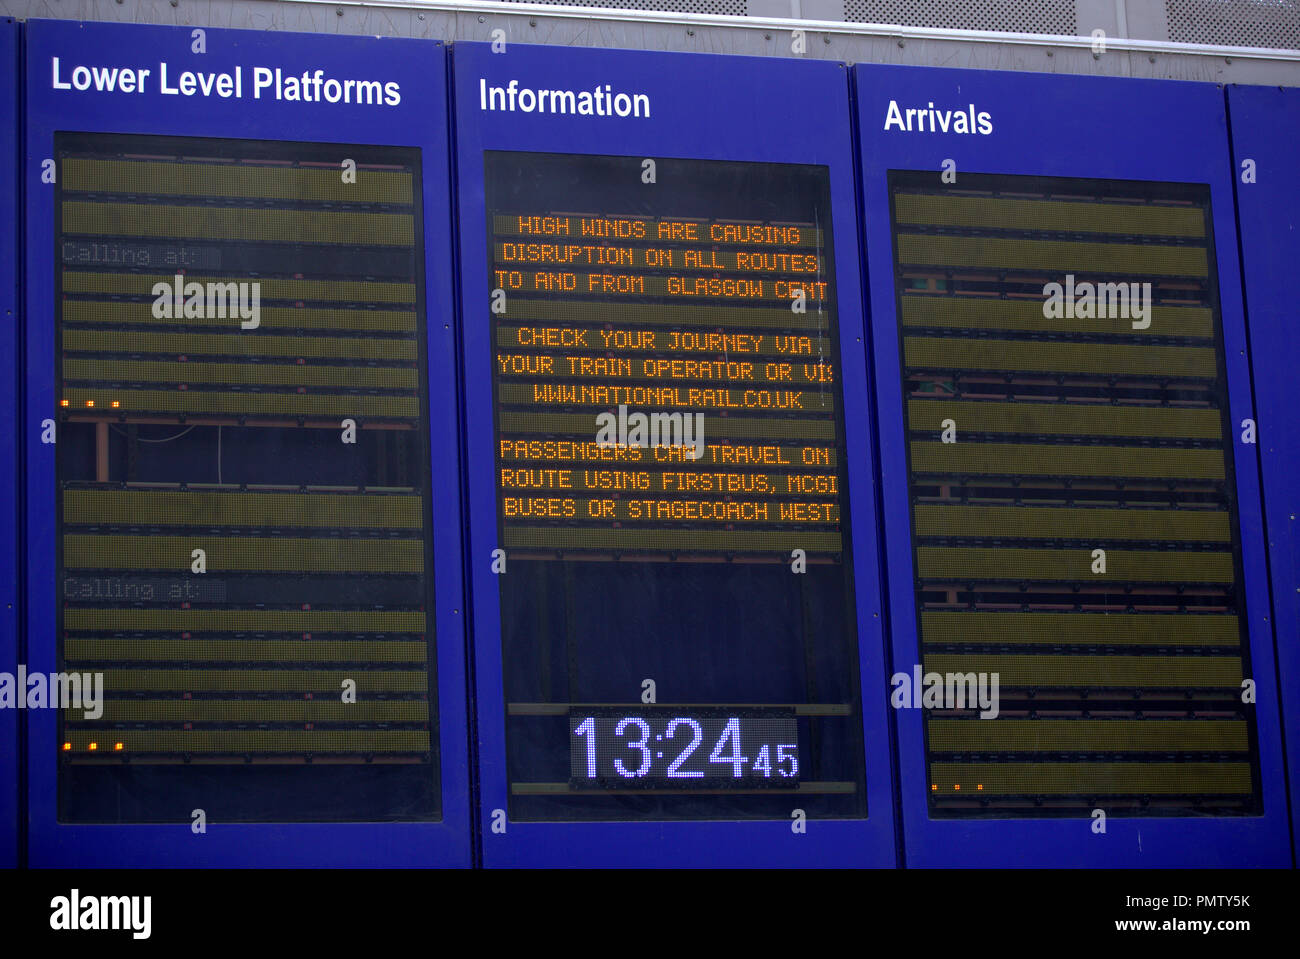 Glasgow, Scotland, UK, 19th September, 2018. UK Weather: Storm Ali appeared in the city overnight bringing wind and rain with an amber be prepared warning from the met office.Scotrail have canceled all trains from the main Glasgow stations, Central station is pictured with its empty travel boards and irate passengers, and are advising travelers to find alternative transport stating train tickets are valid on firstbus. Gerard Ferry/Alamy news Stock Photo